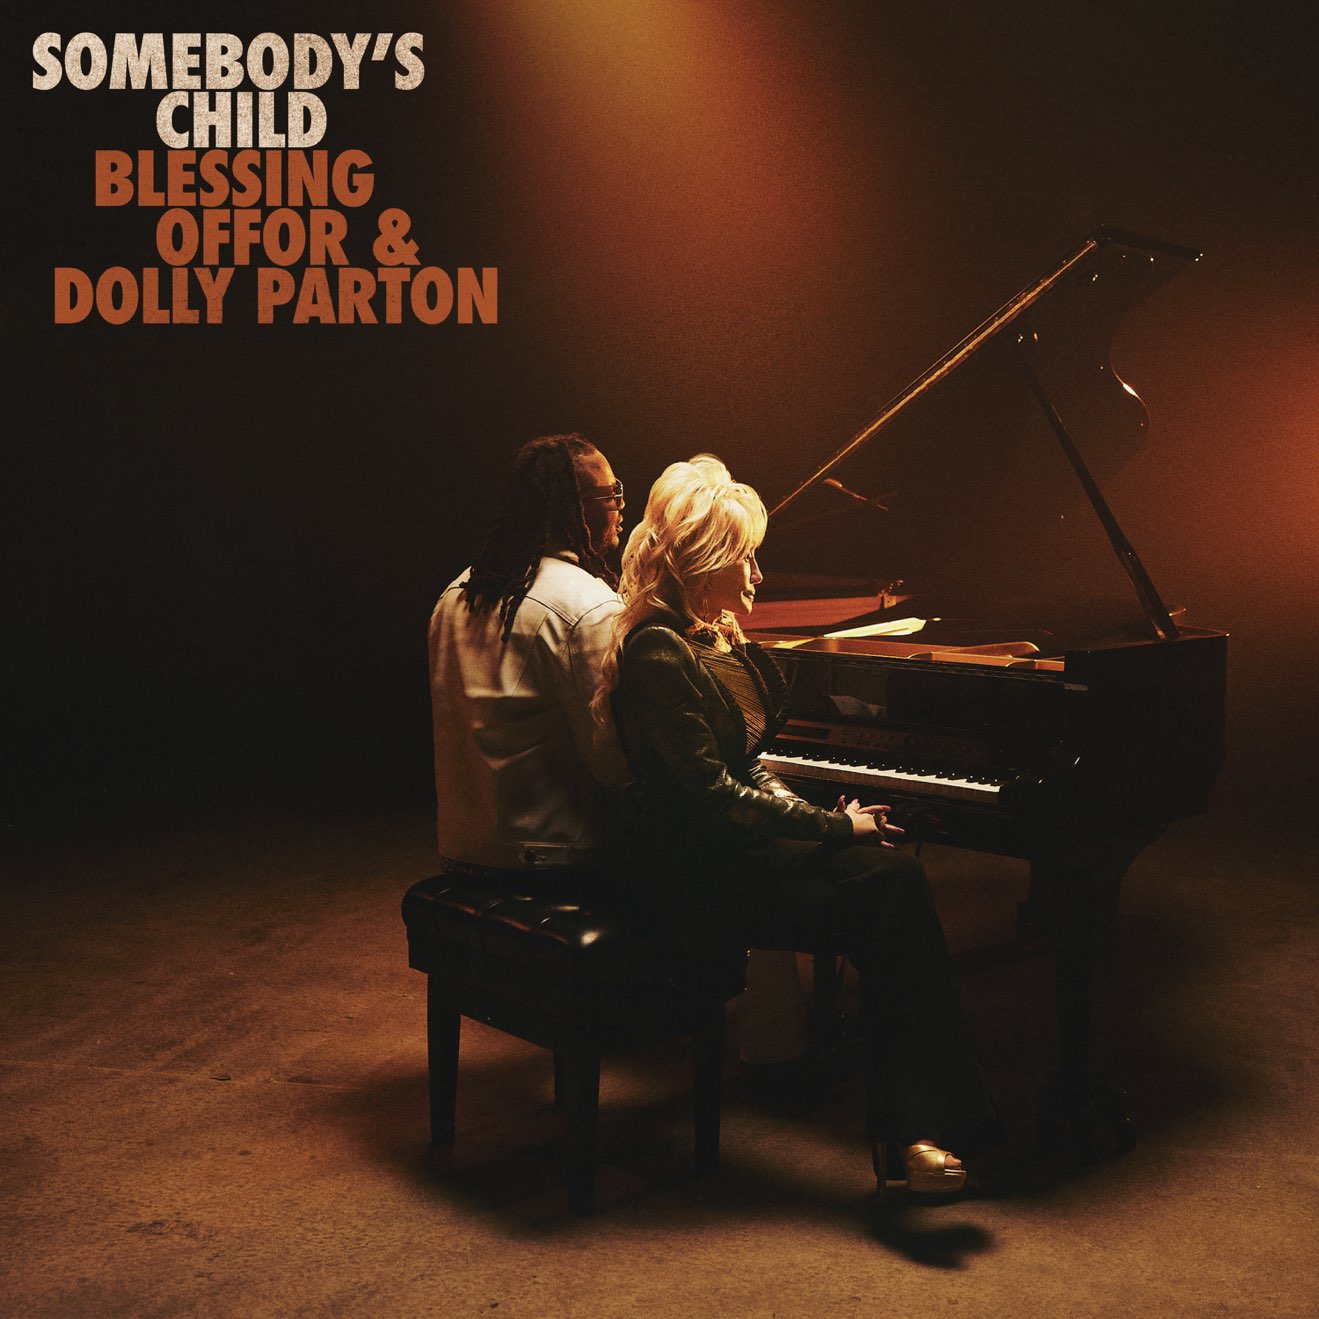 Blessing Offor & Dolly Parton – Somebody’s Child – Single (2024) [iTunes Match M4A]